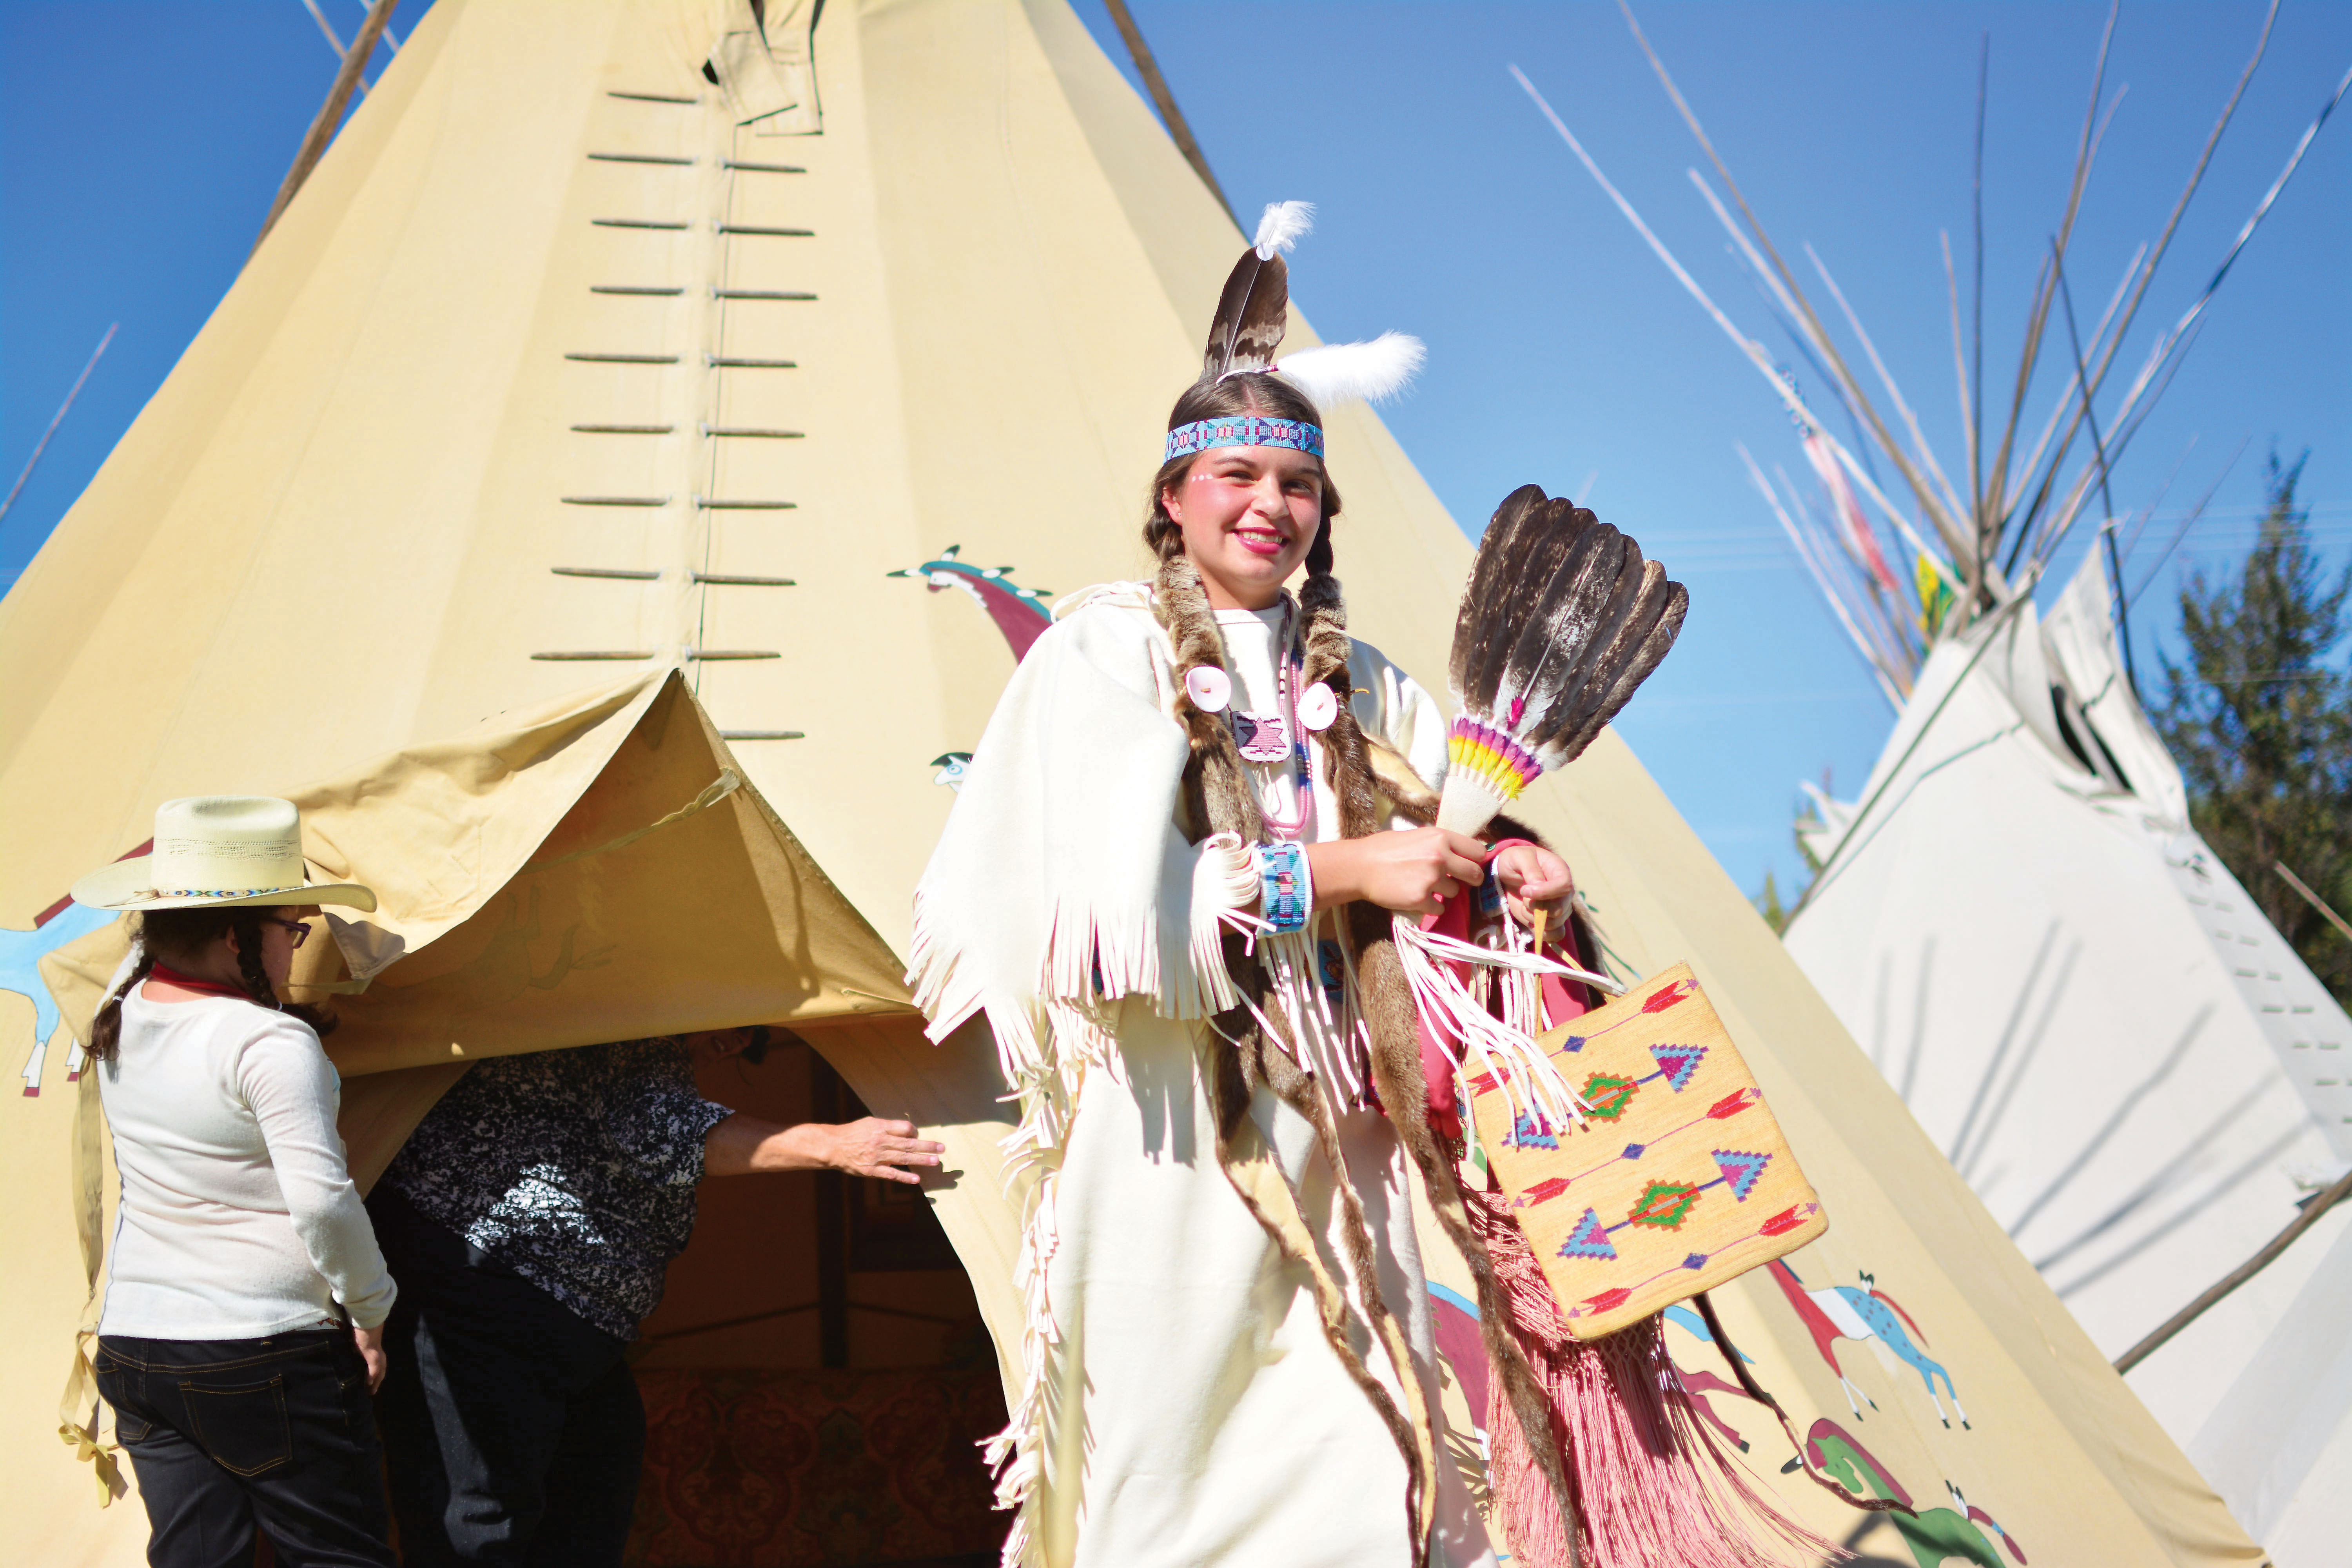 Although each piece of Sams’ traditional regalia has a different significance — many having been passed down through the family for generations — the image as a whole has been tokenized by western society and is often the only way that the dominant culture depicts Native Americans.